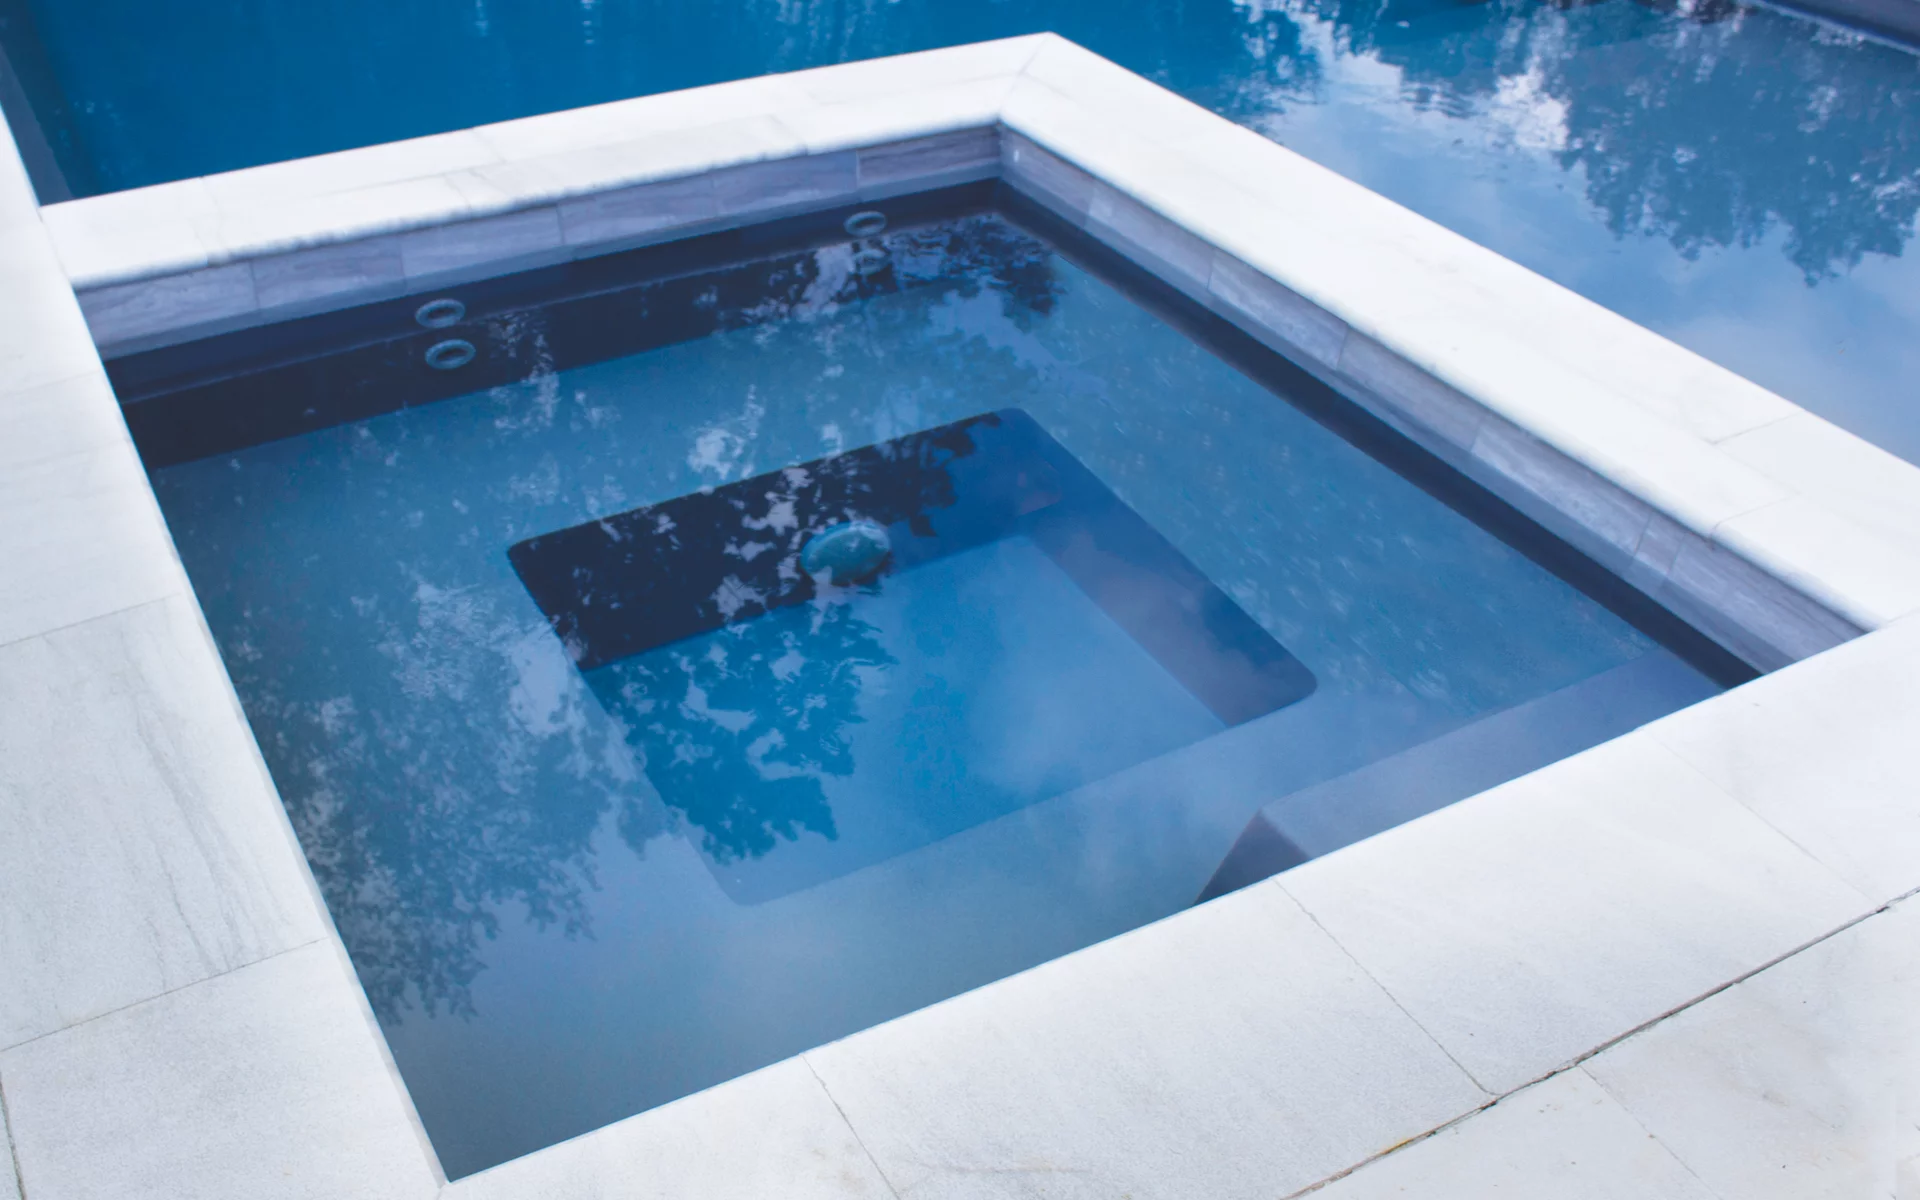 The Achieve spa by Evo Pools